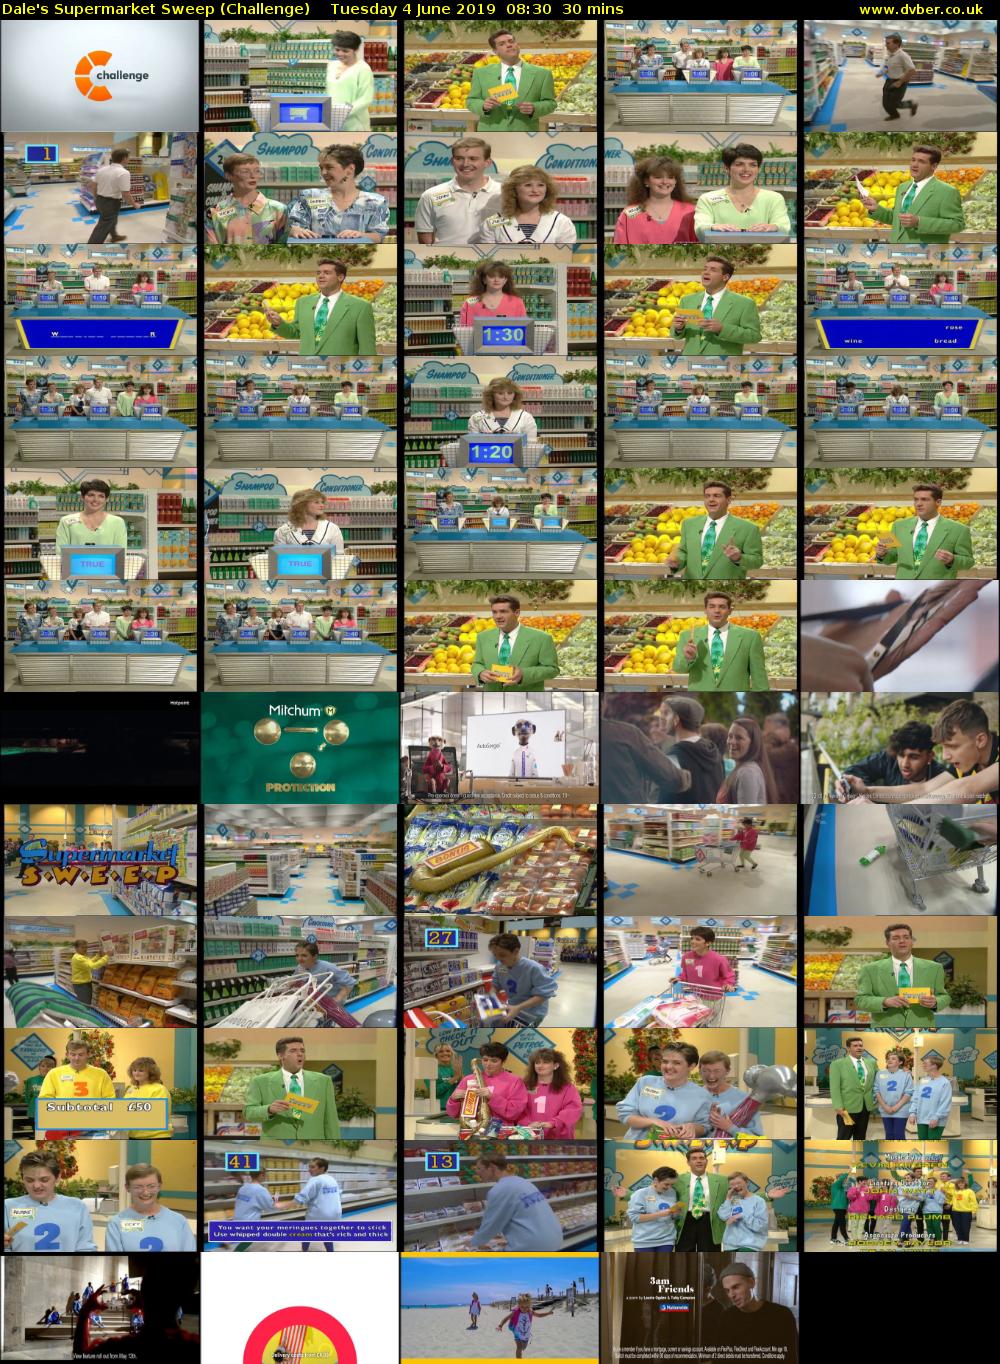 Dale's Supermarket Sweep (Challenge) Tuesday 4 June 2019 08:30 - 09:00